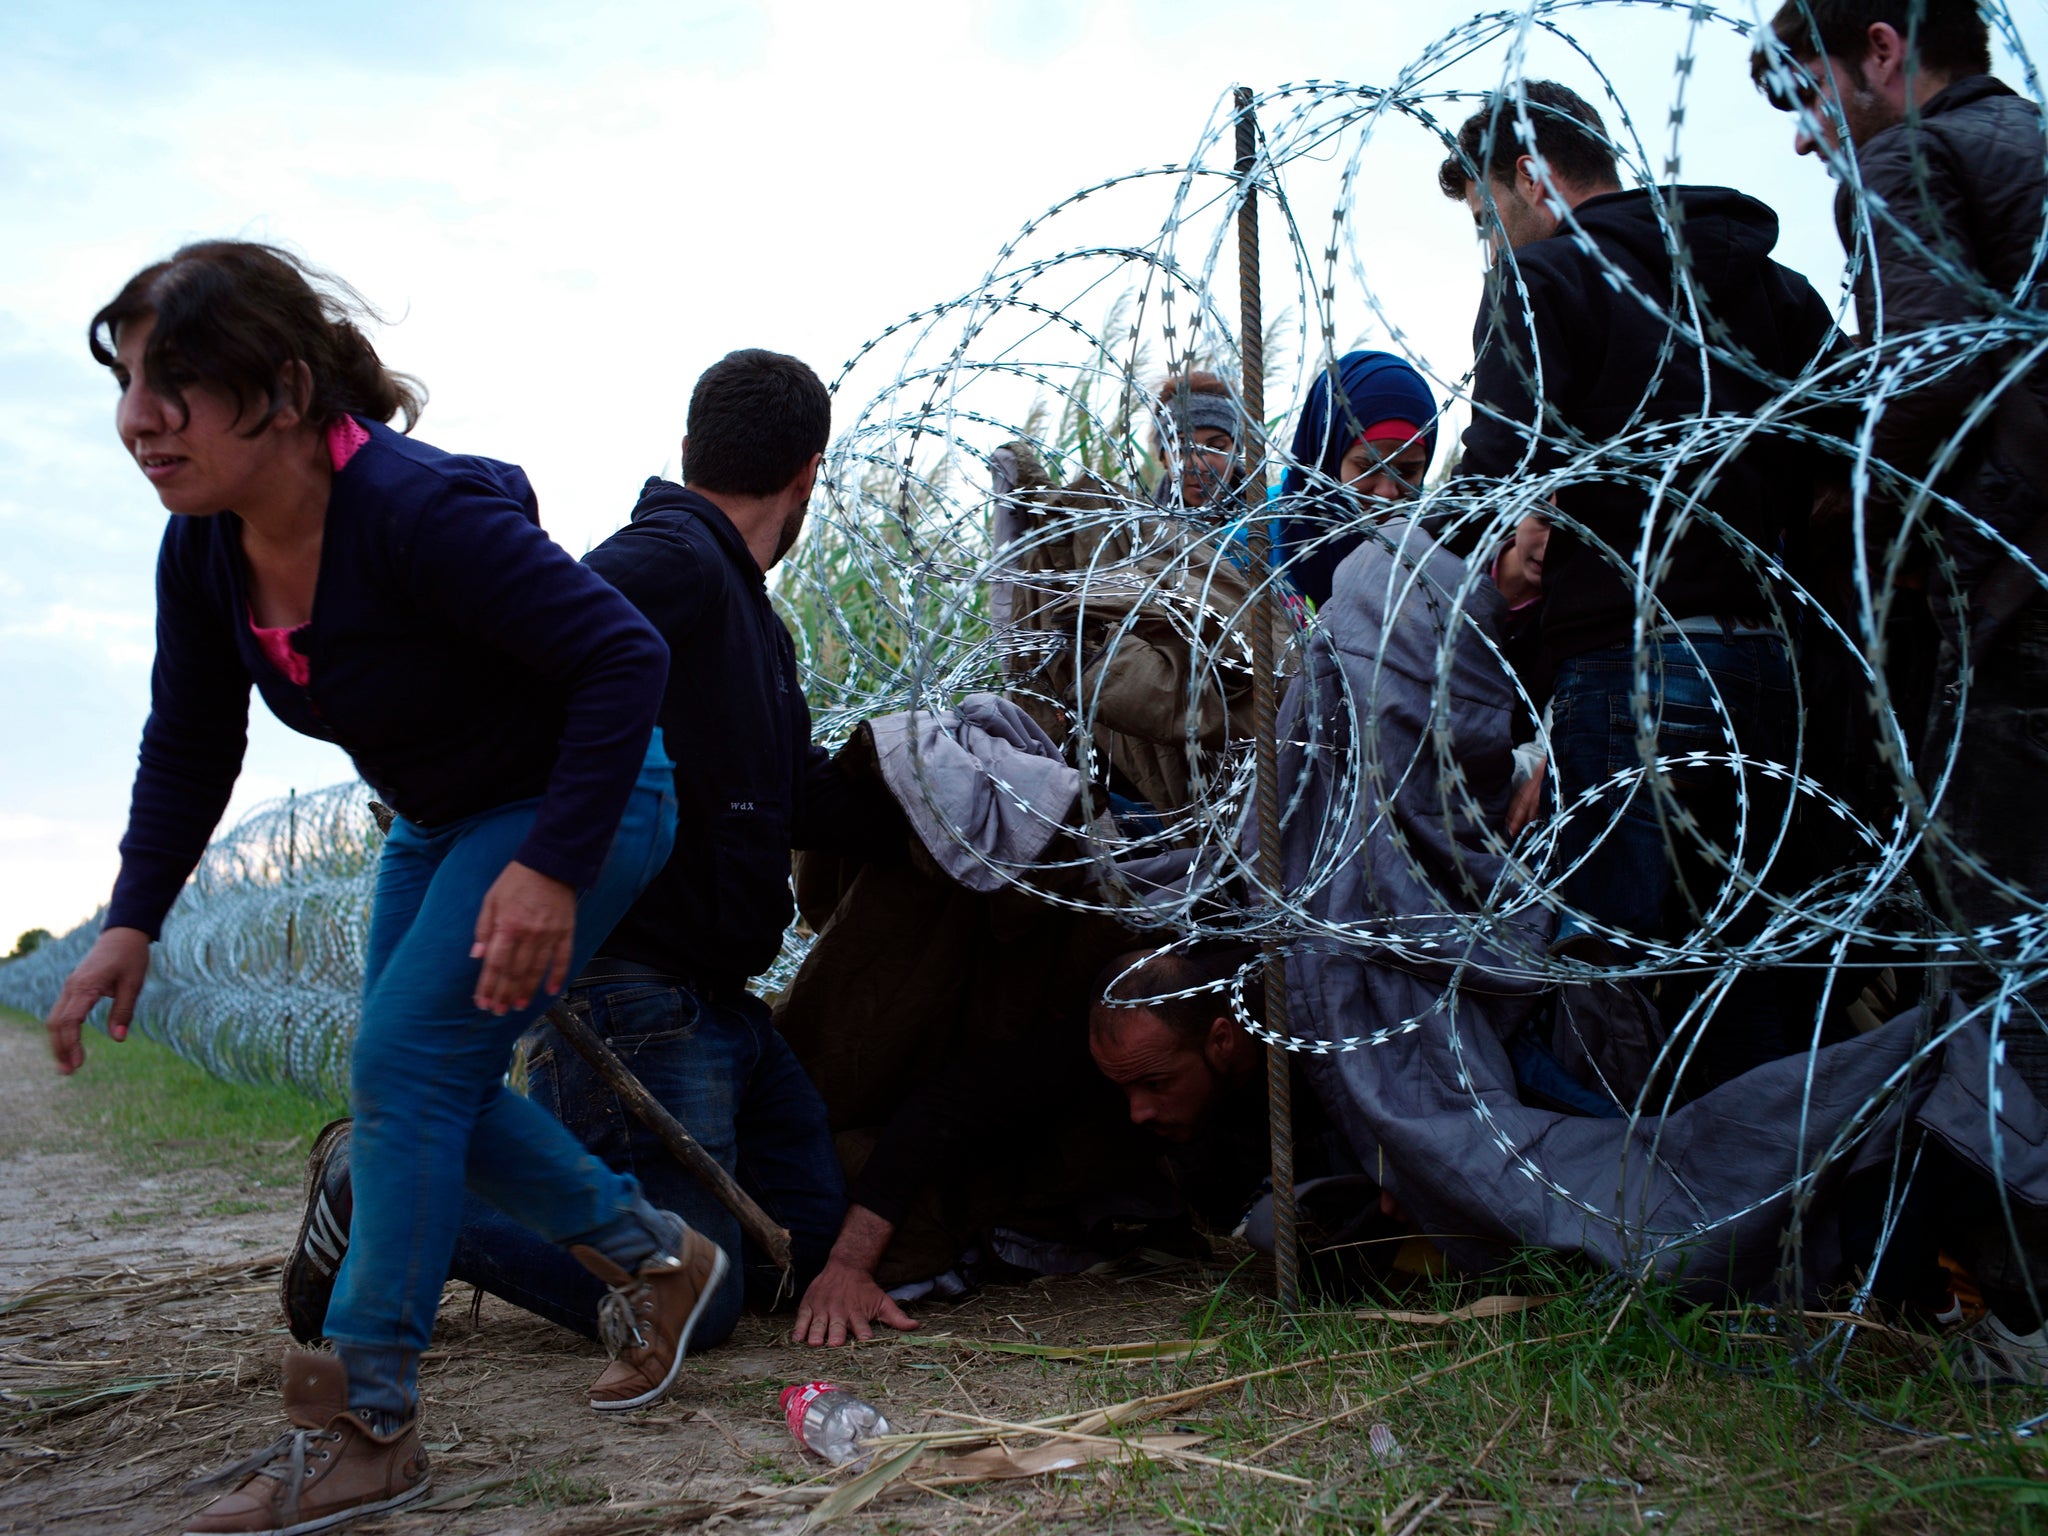 Syrian refugees cross into Hungary underneath the border fence on the Hungarian/Serbian border near Roszke, Hungary